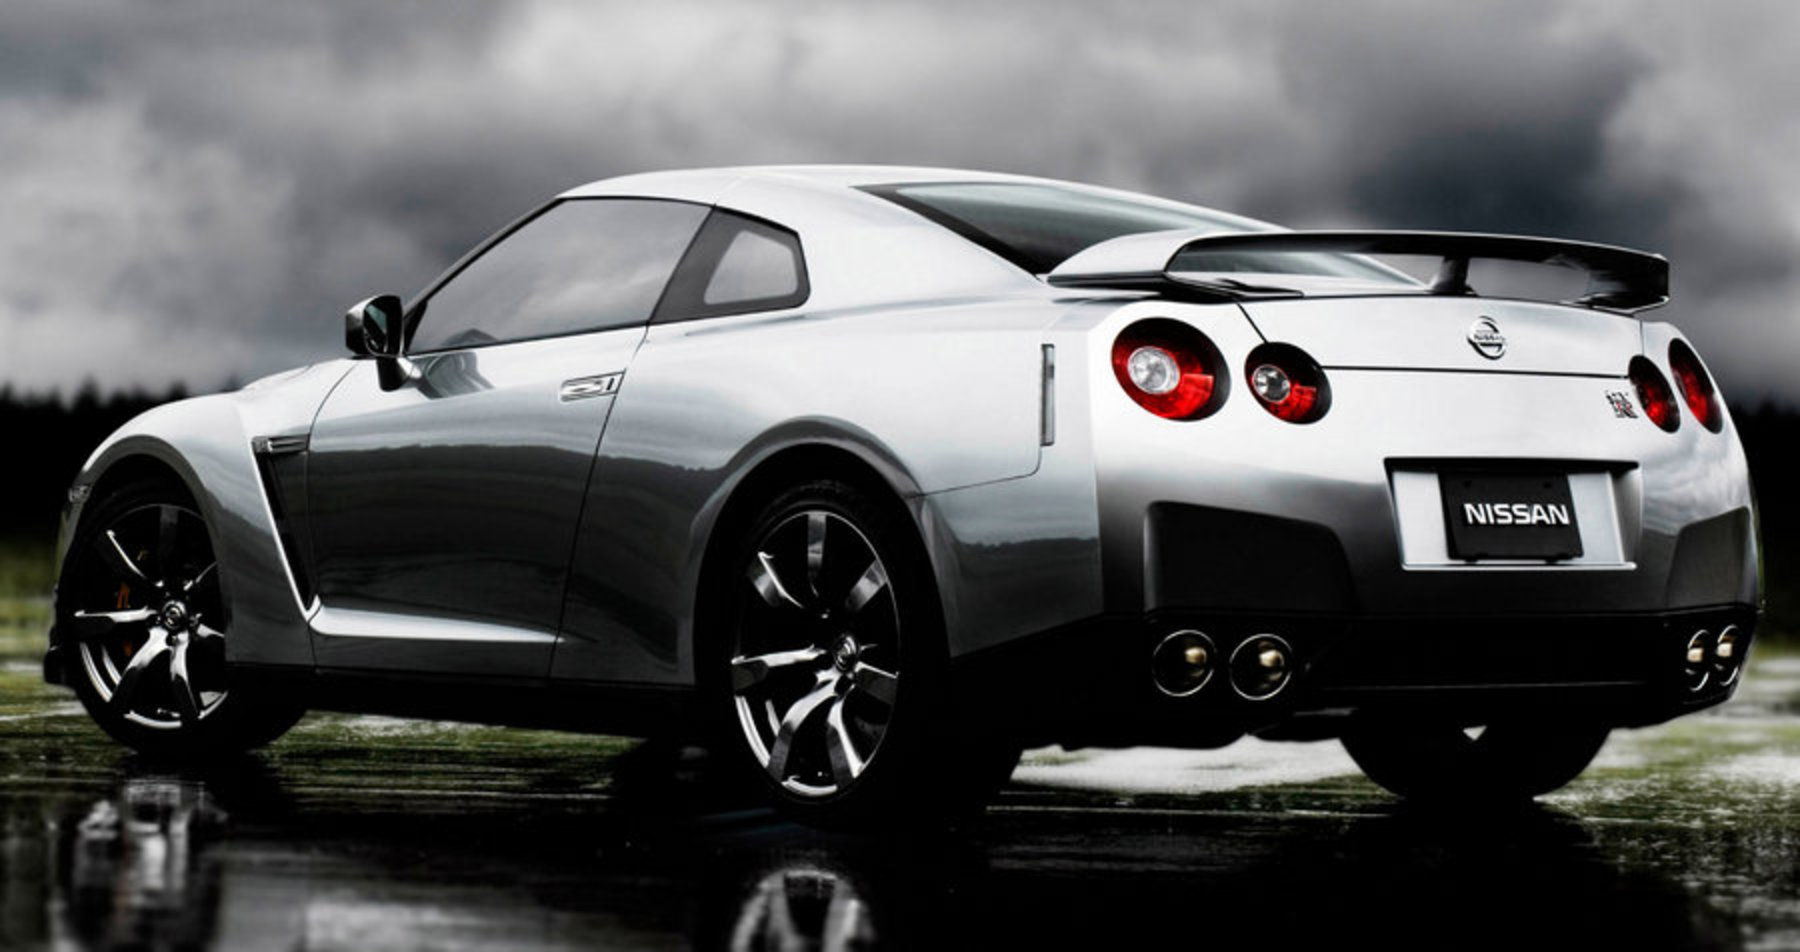 2011 Nissan GT-R Premium launched in the US